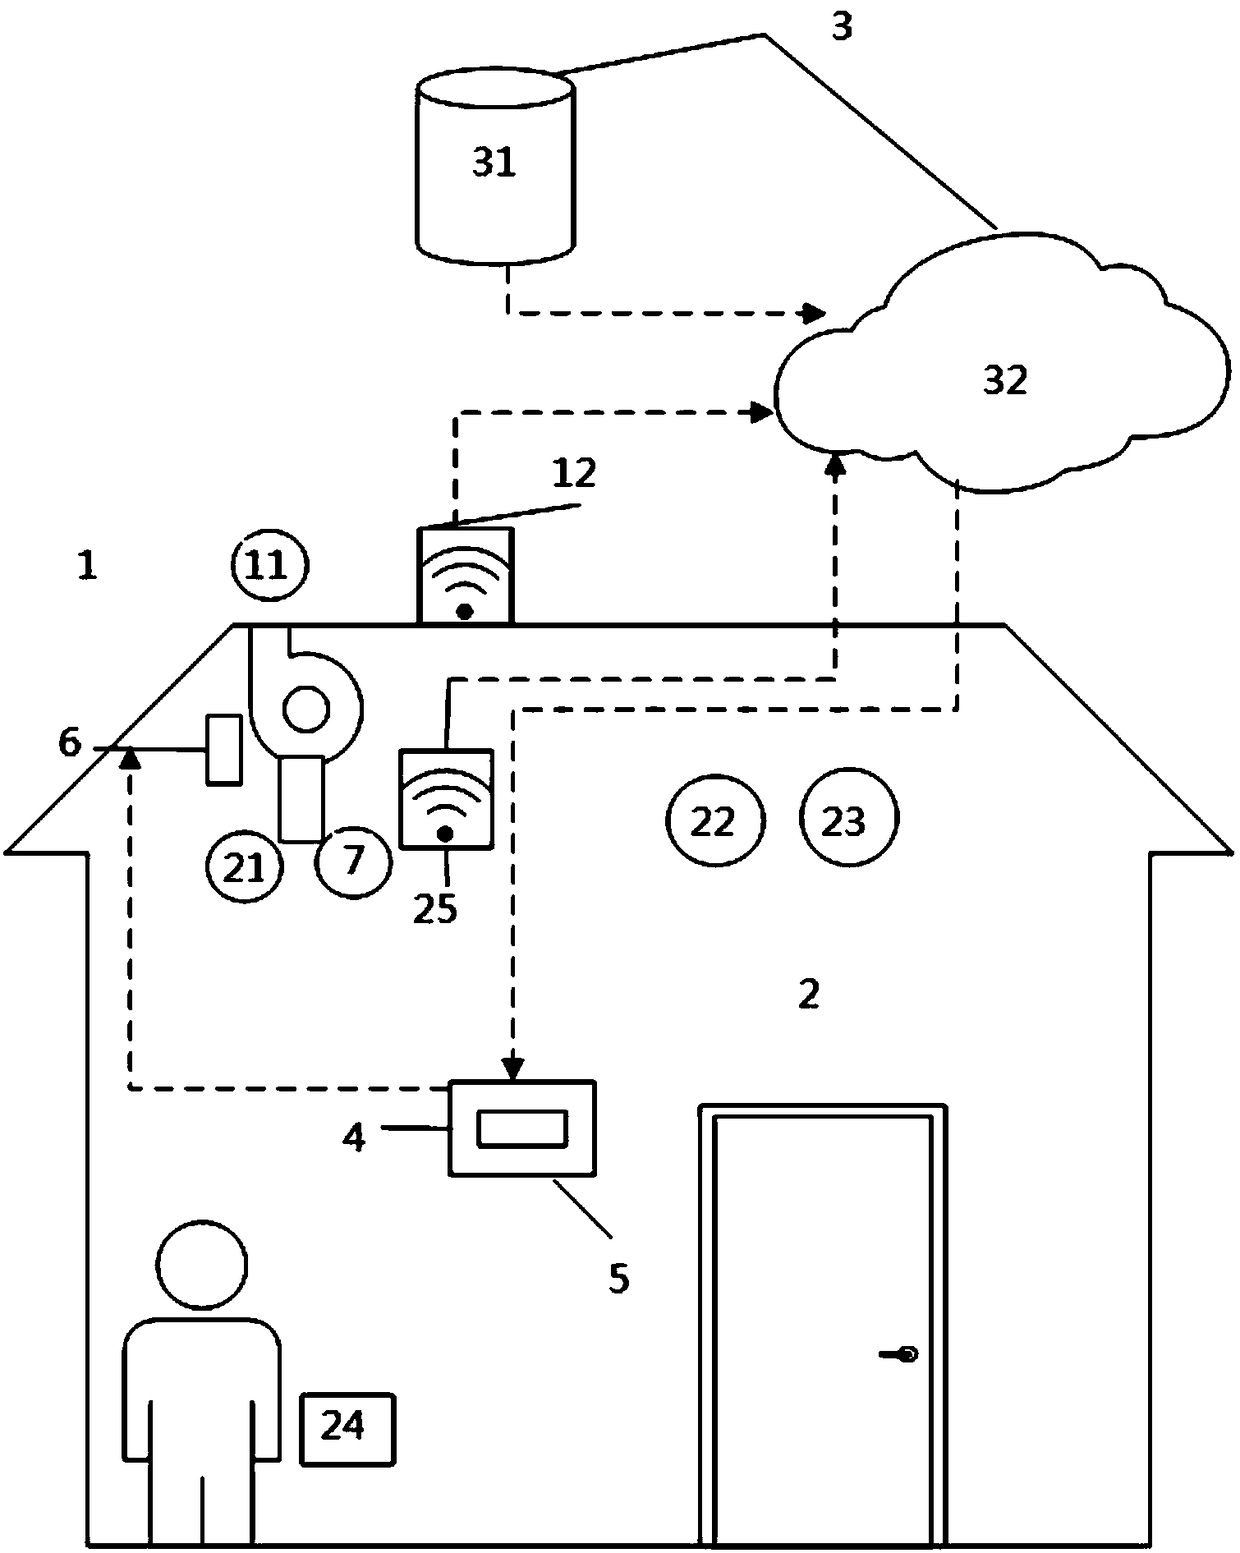 Indoor air quality control system based on personnel positioning and ventilation calculation method